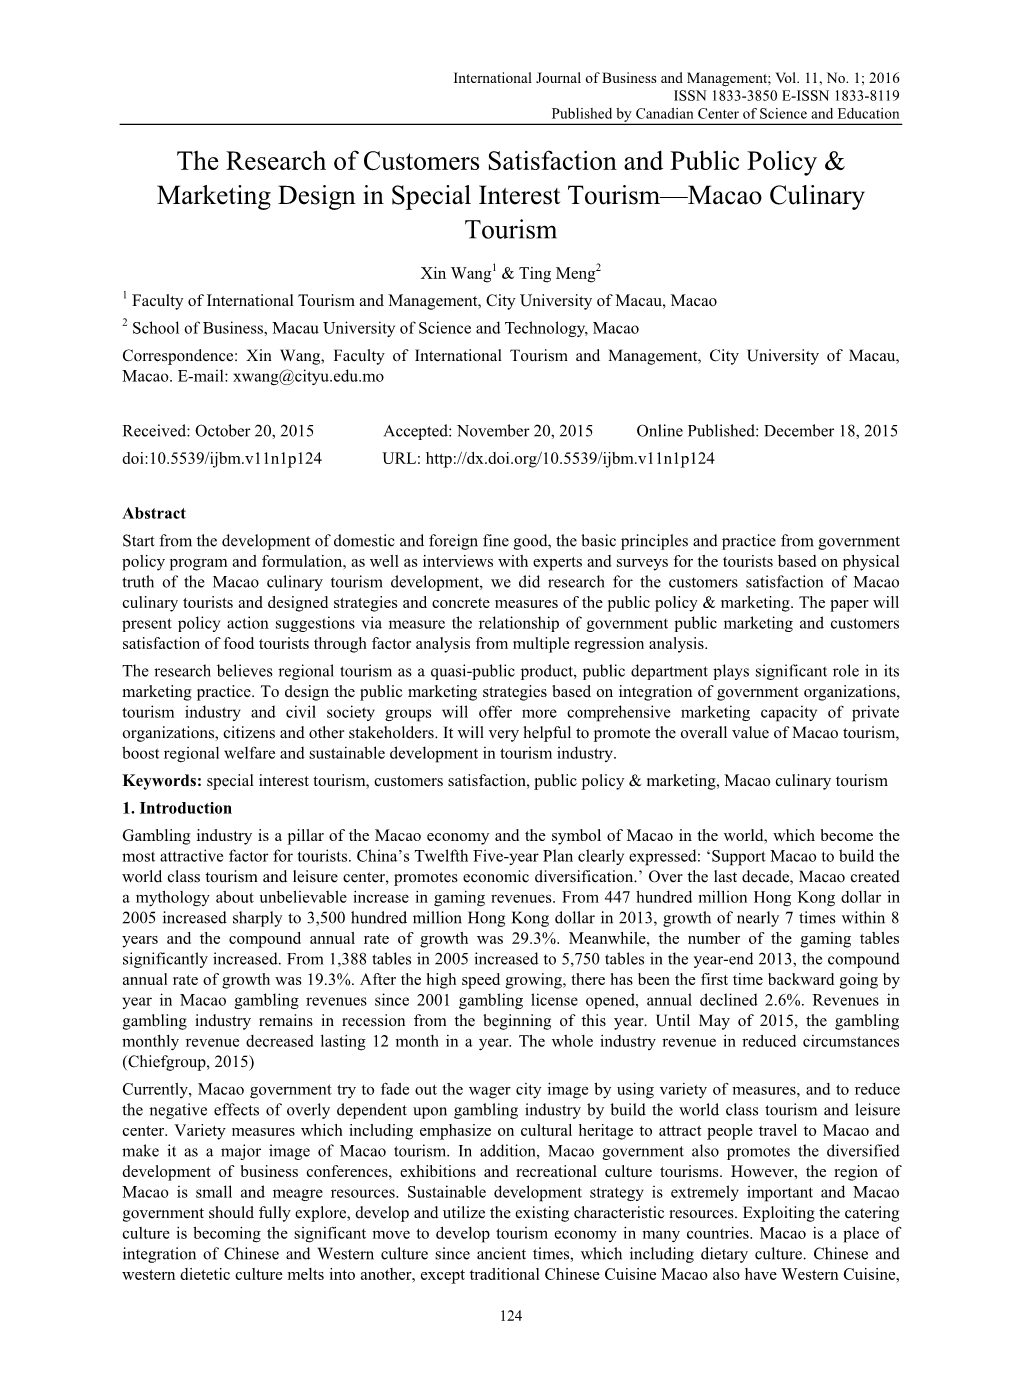 The Research of Customers Satisfaction and Public Policy & Marketing Design in Special Interest Tourism—Macao Culinary Tourism